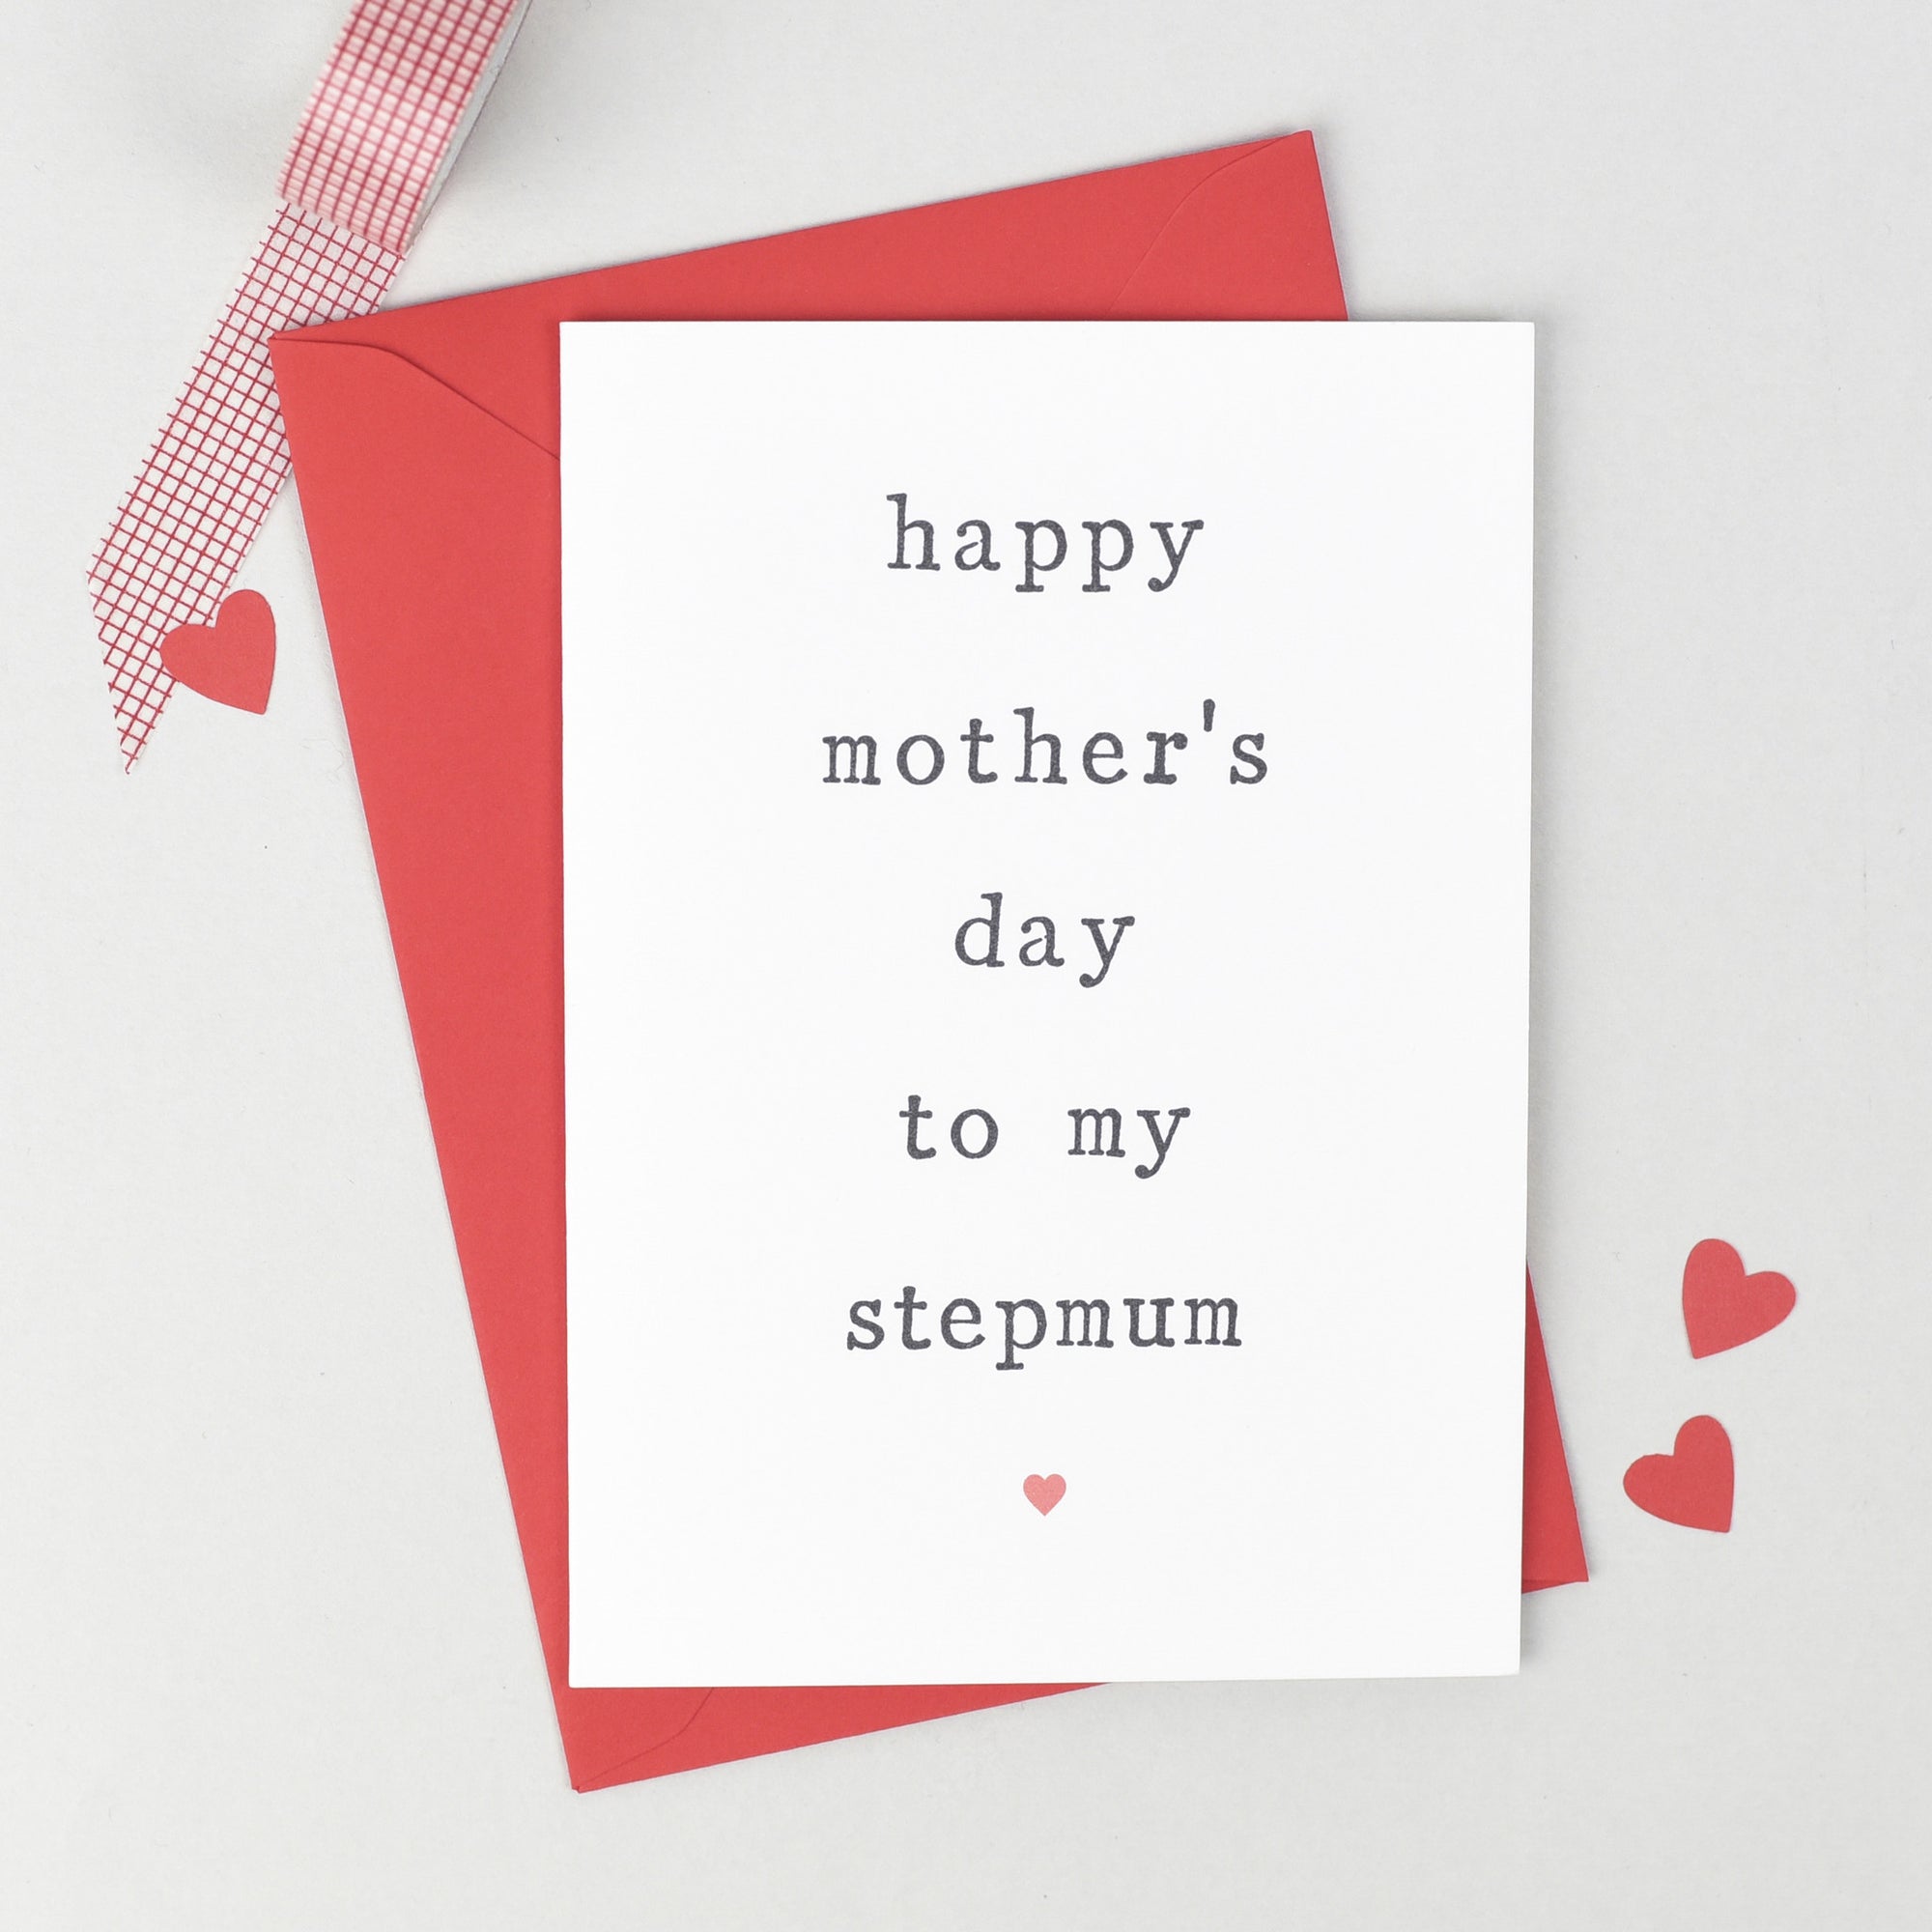 Stepmum Mothers Day Card Red 